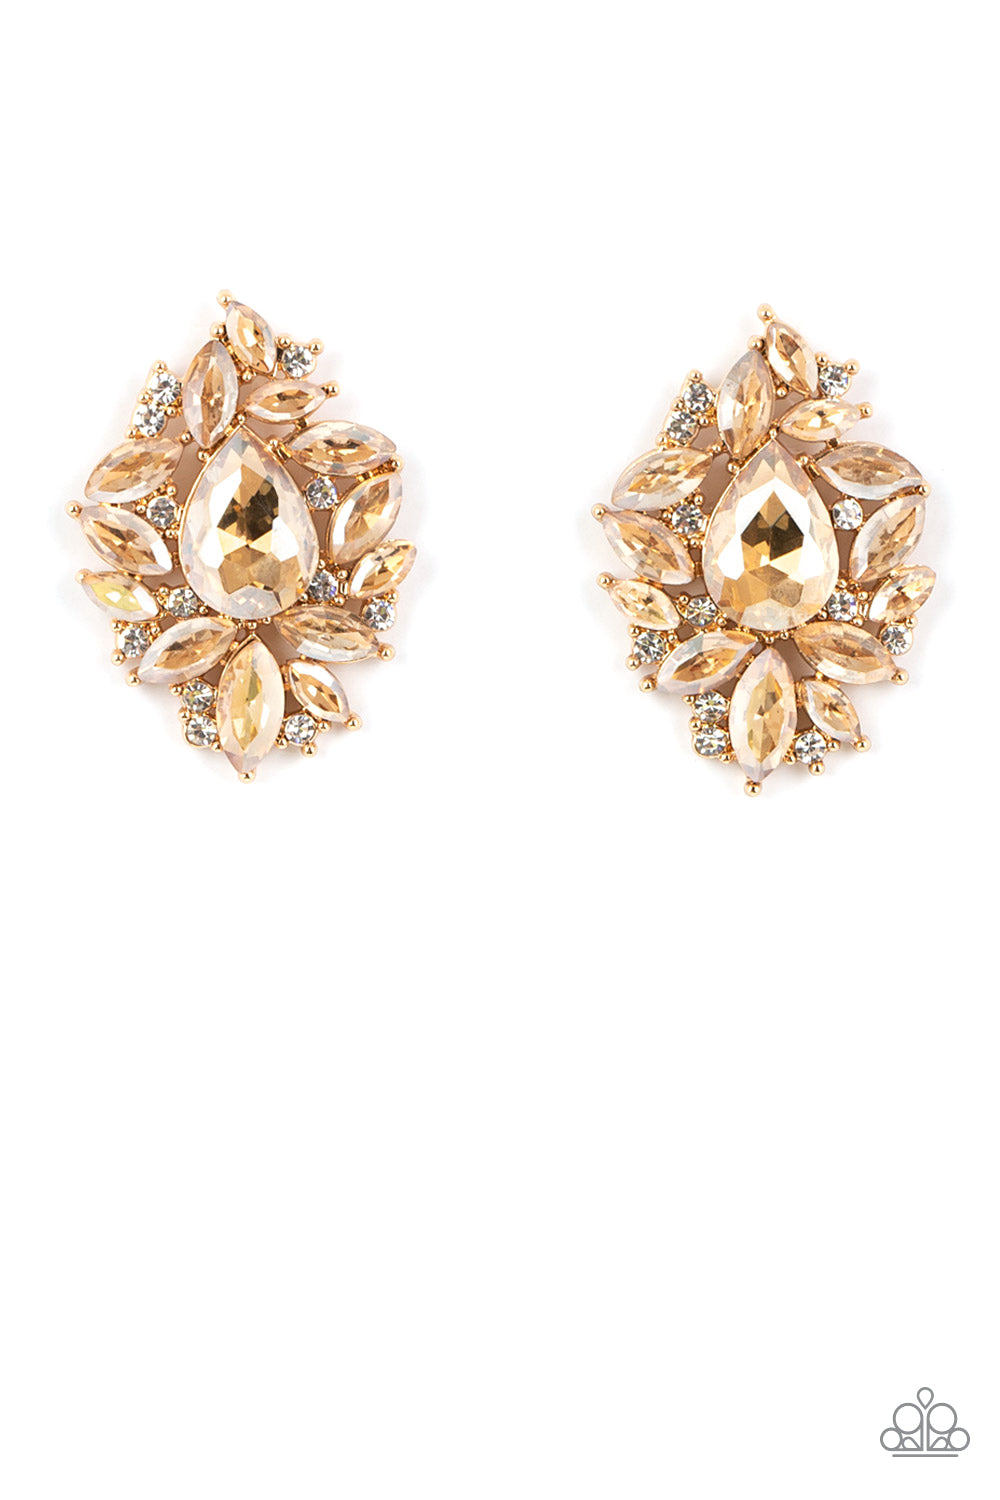 We All Scream for Ice QUEEN - Gold Earrings - Paparazzi Accessories - Alies Bling Bar